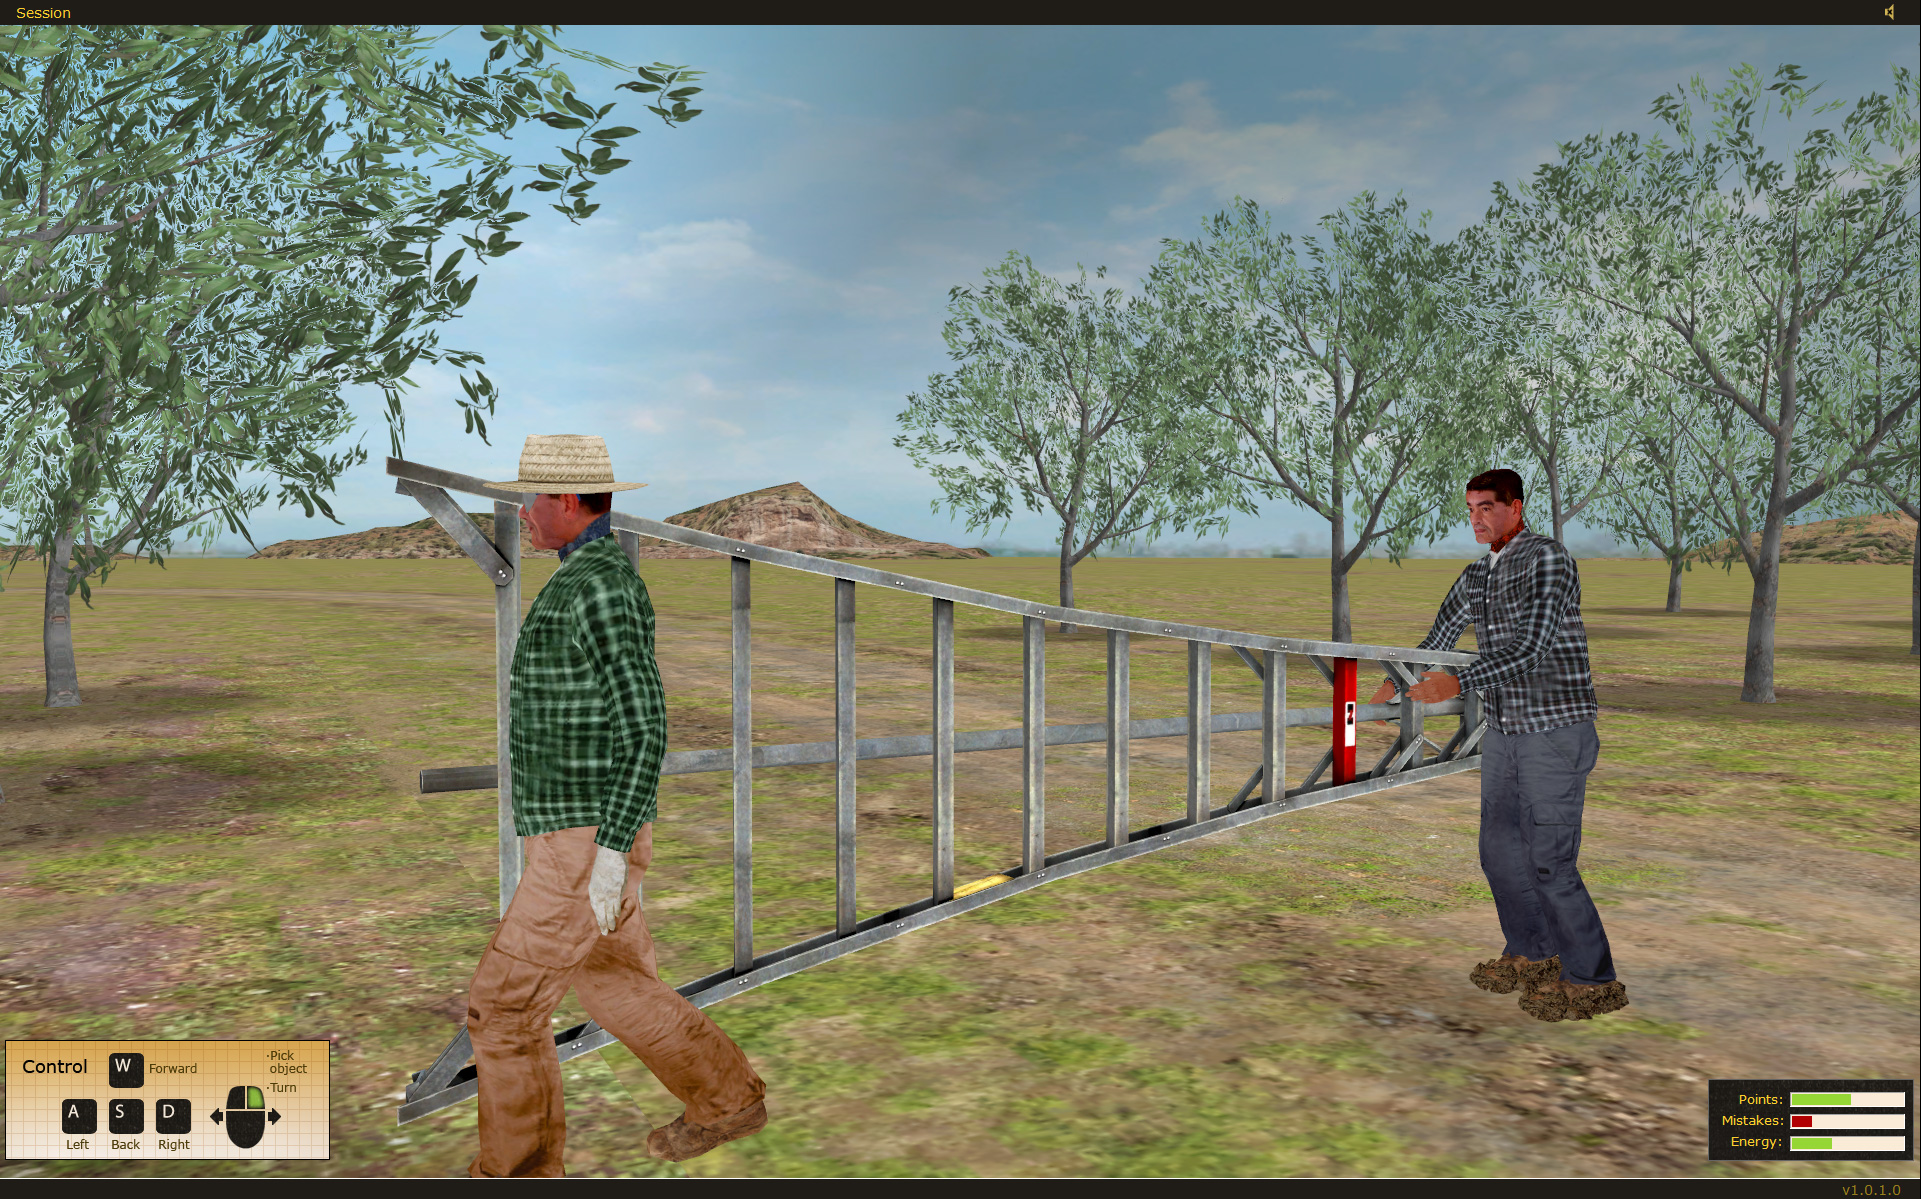 State Compensation Insurance Fund Safety Agricultural Ladder Safety Training Simulator by ForgeFX Simulations